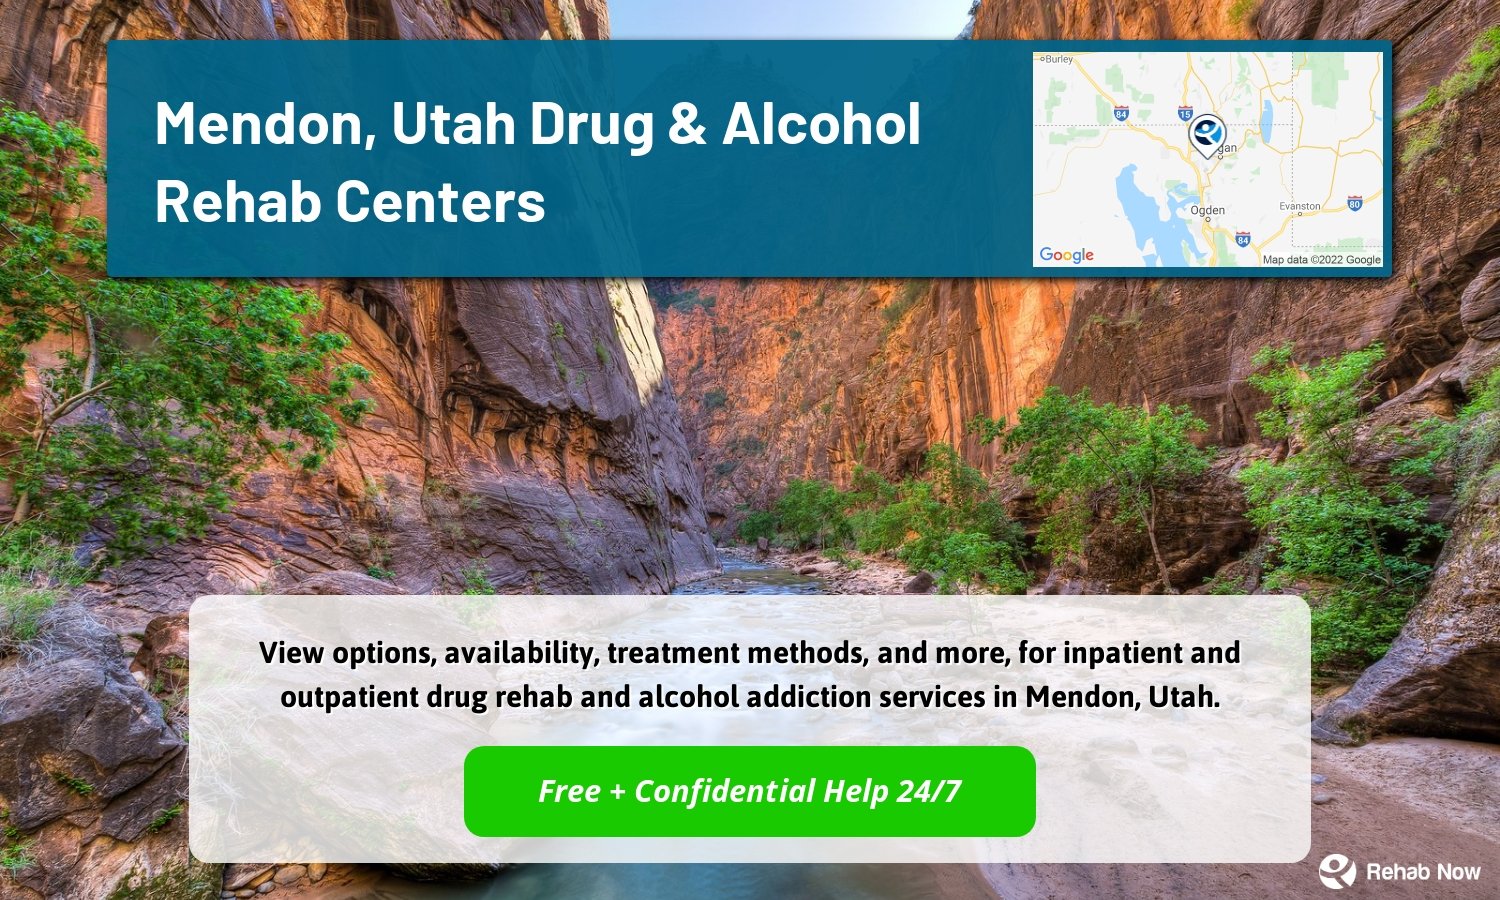 View options, availability, treatment methods, and more, for inpatient and outpatient drug rehab and alcohol addiction services in Mendon, Utah.